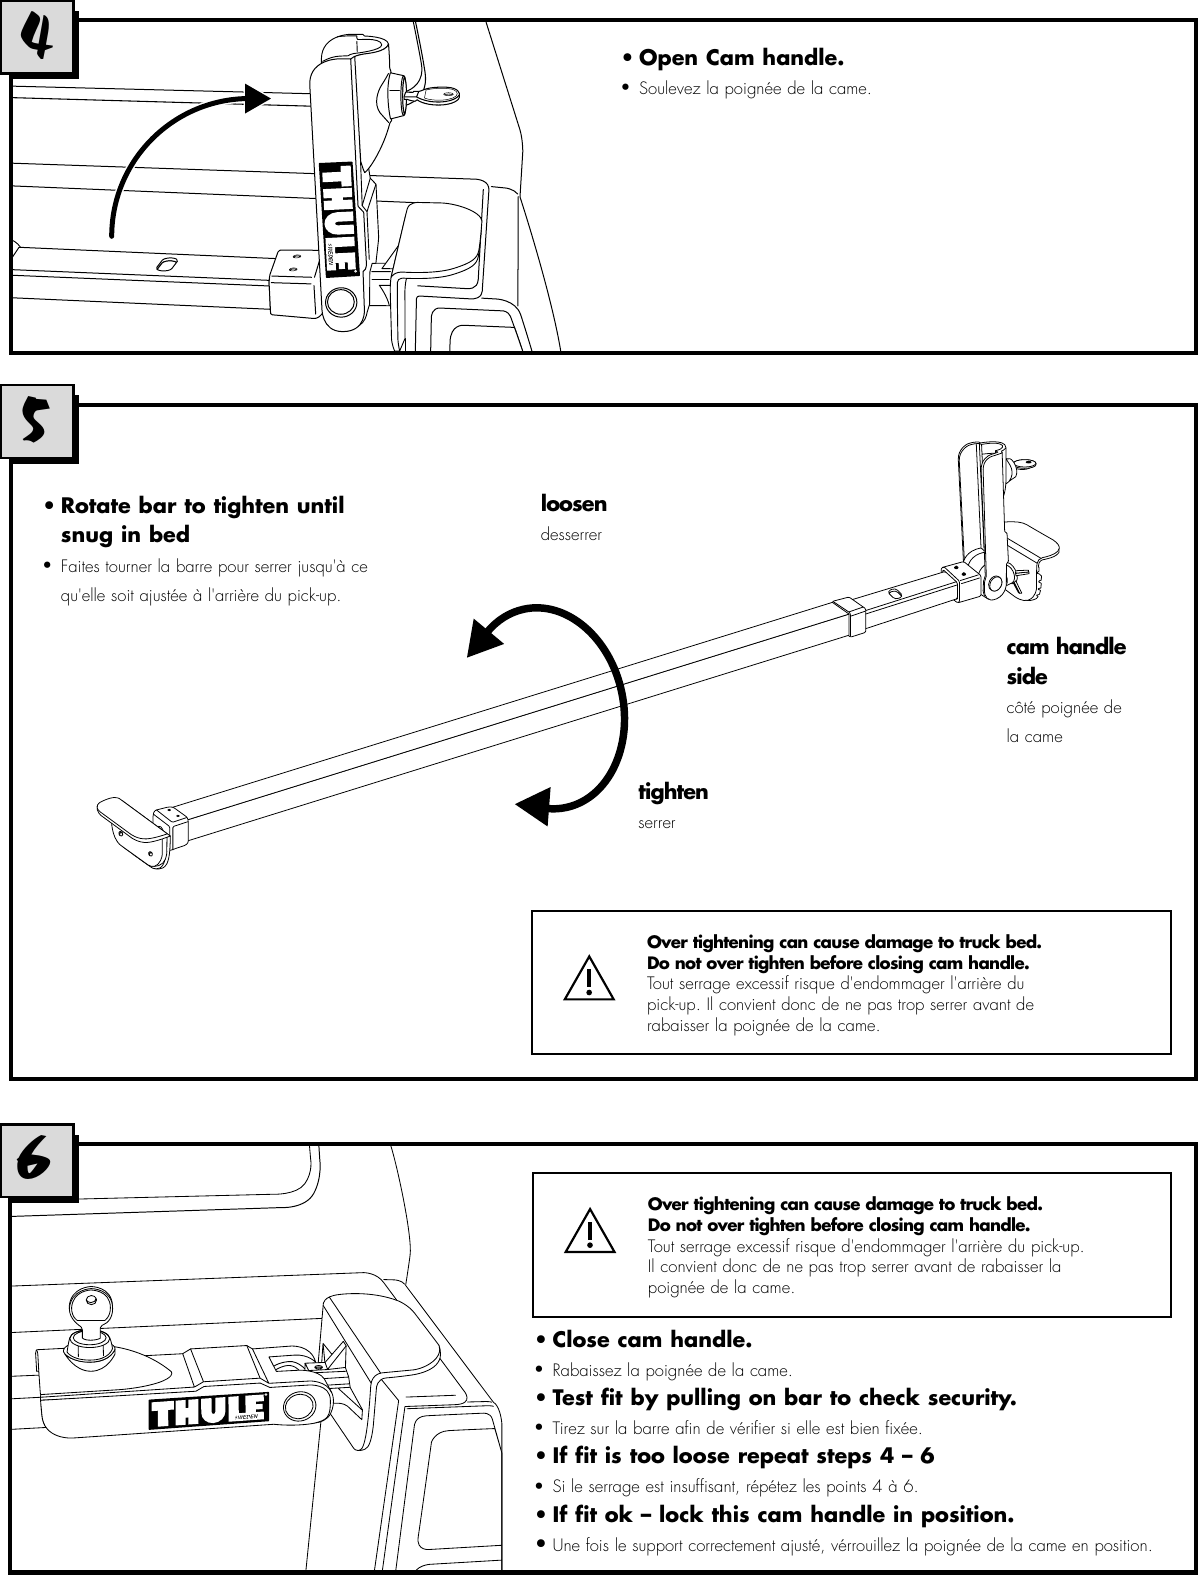 Page 5 of 7 - Thule Thule-Bed-Rider-822-91822-Users-Manual- 501-5326-02#822/91822 Bed Rider  Thule-bed-rider-822-91822-users-manual